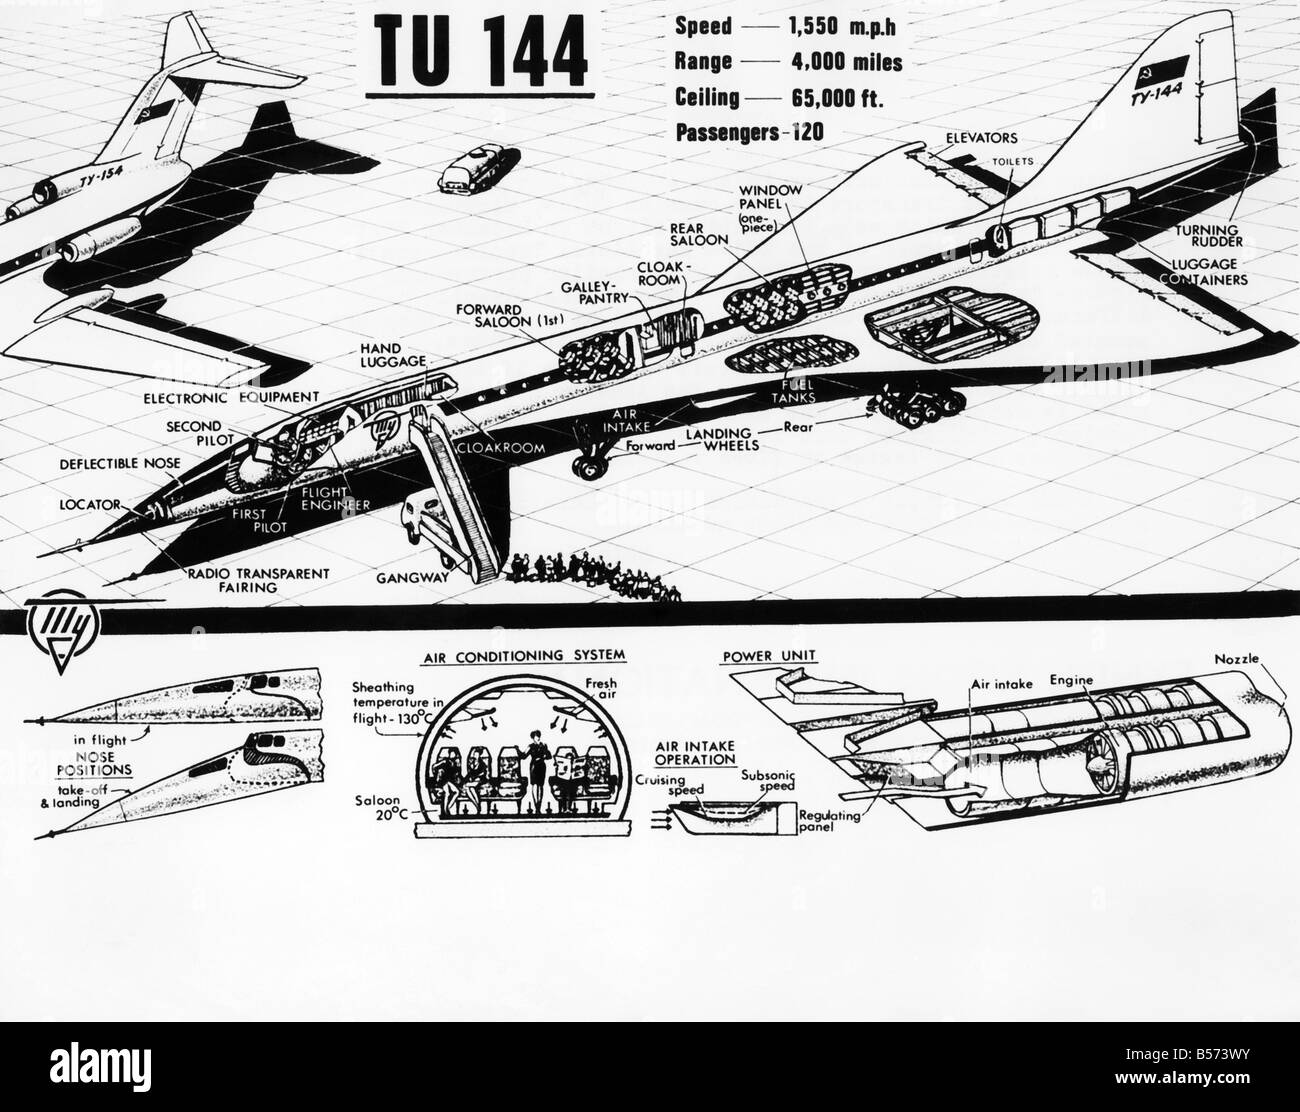 A cutaway artist's impression of the Russian TU144 supersonic transport for civil aviation. June 1969 P003956 Stock Photo